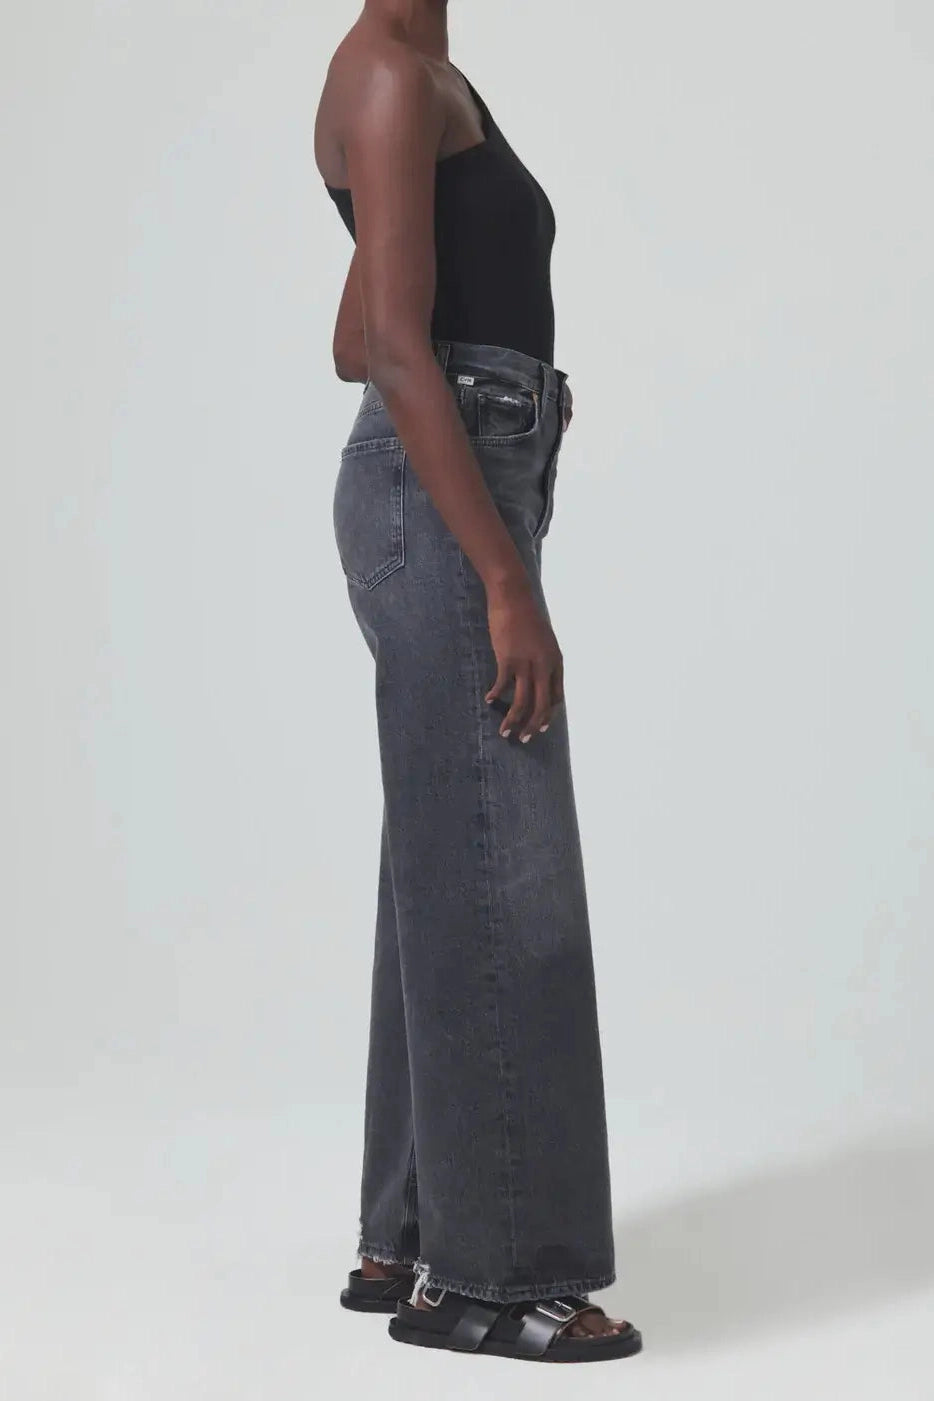 CITIZENS OF HUMANITY PALOMA BAGGY JEANS IN BEVERLY BROOK